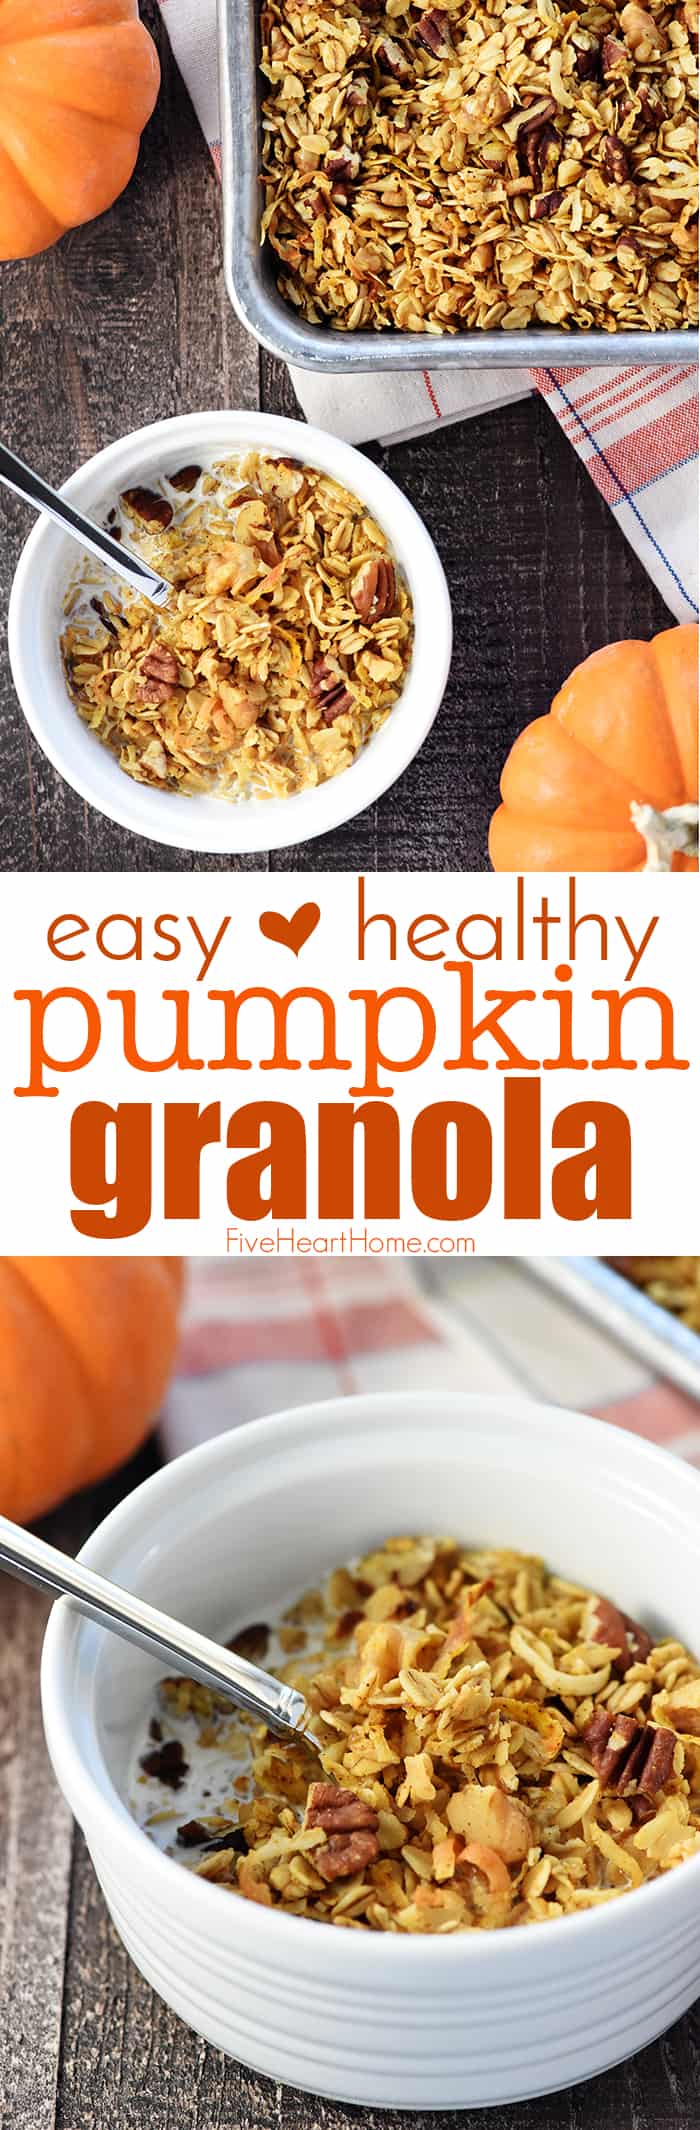 Healthy Pumpkin Granola Collage with Text Overlay 